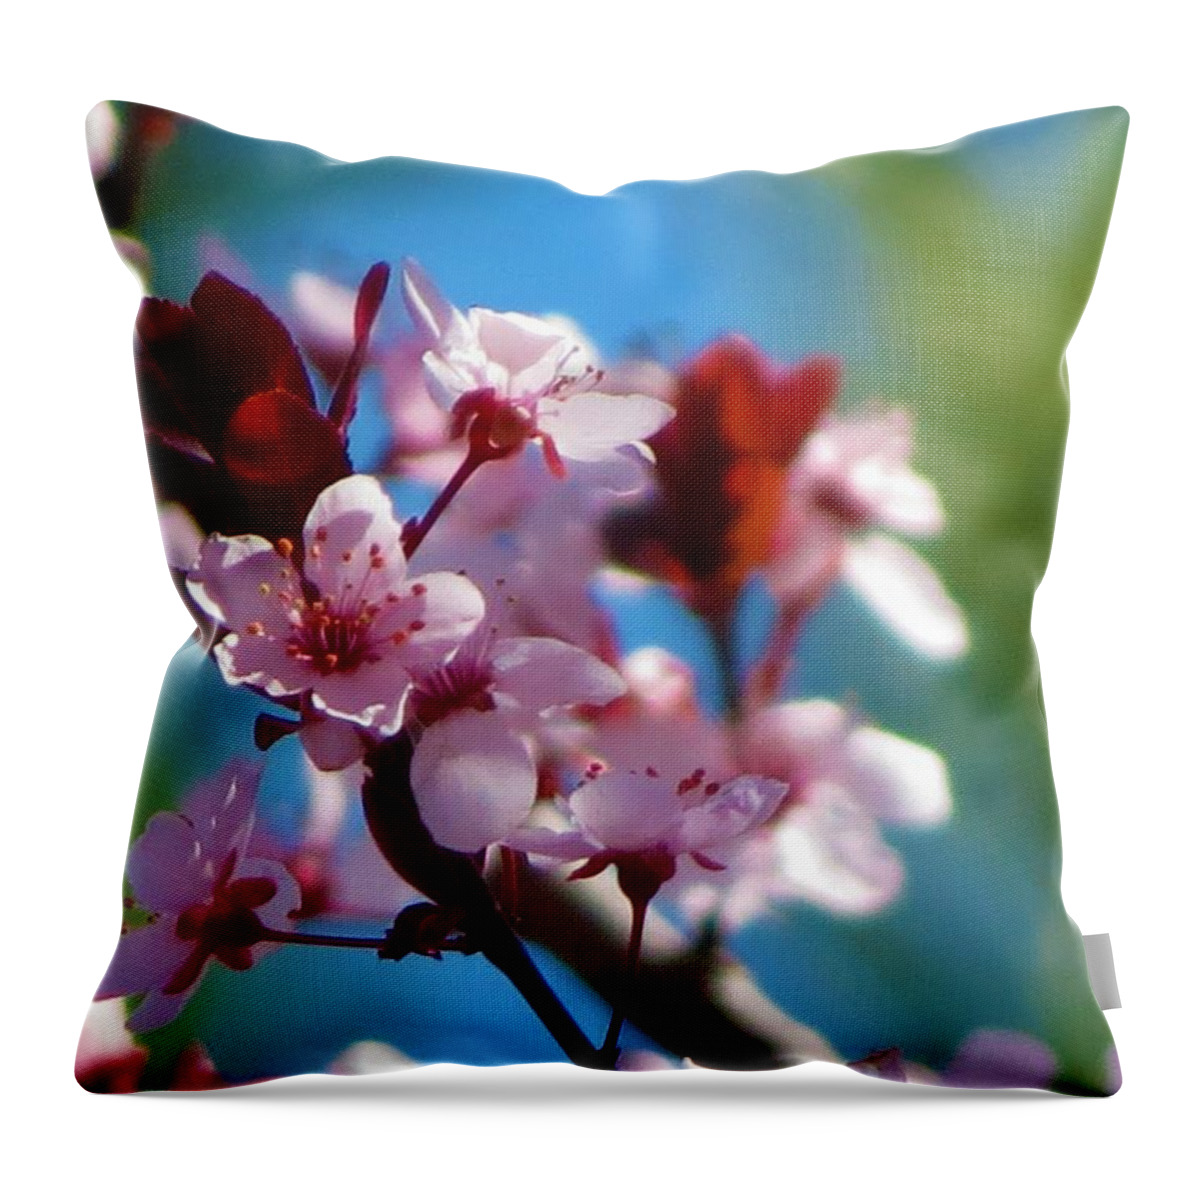 Spring Throw Pillow featuring the photograph Spring Blossoms #1 by Vijay Sharon Govender